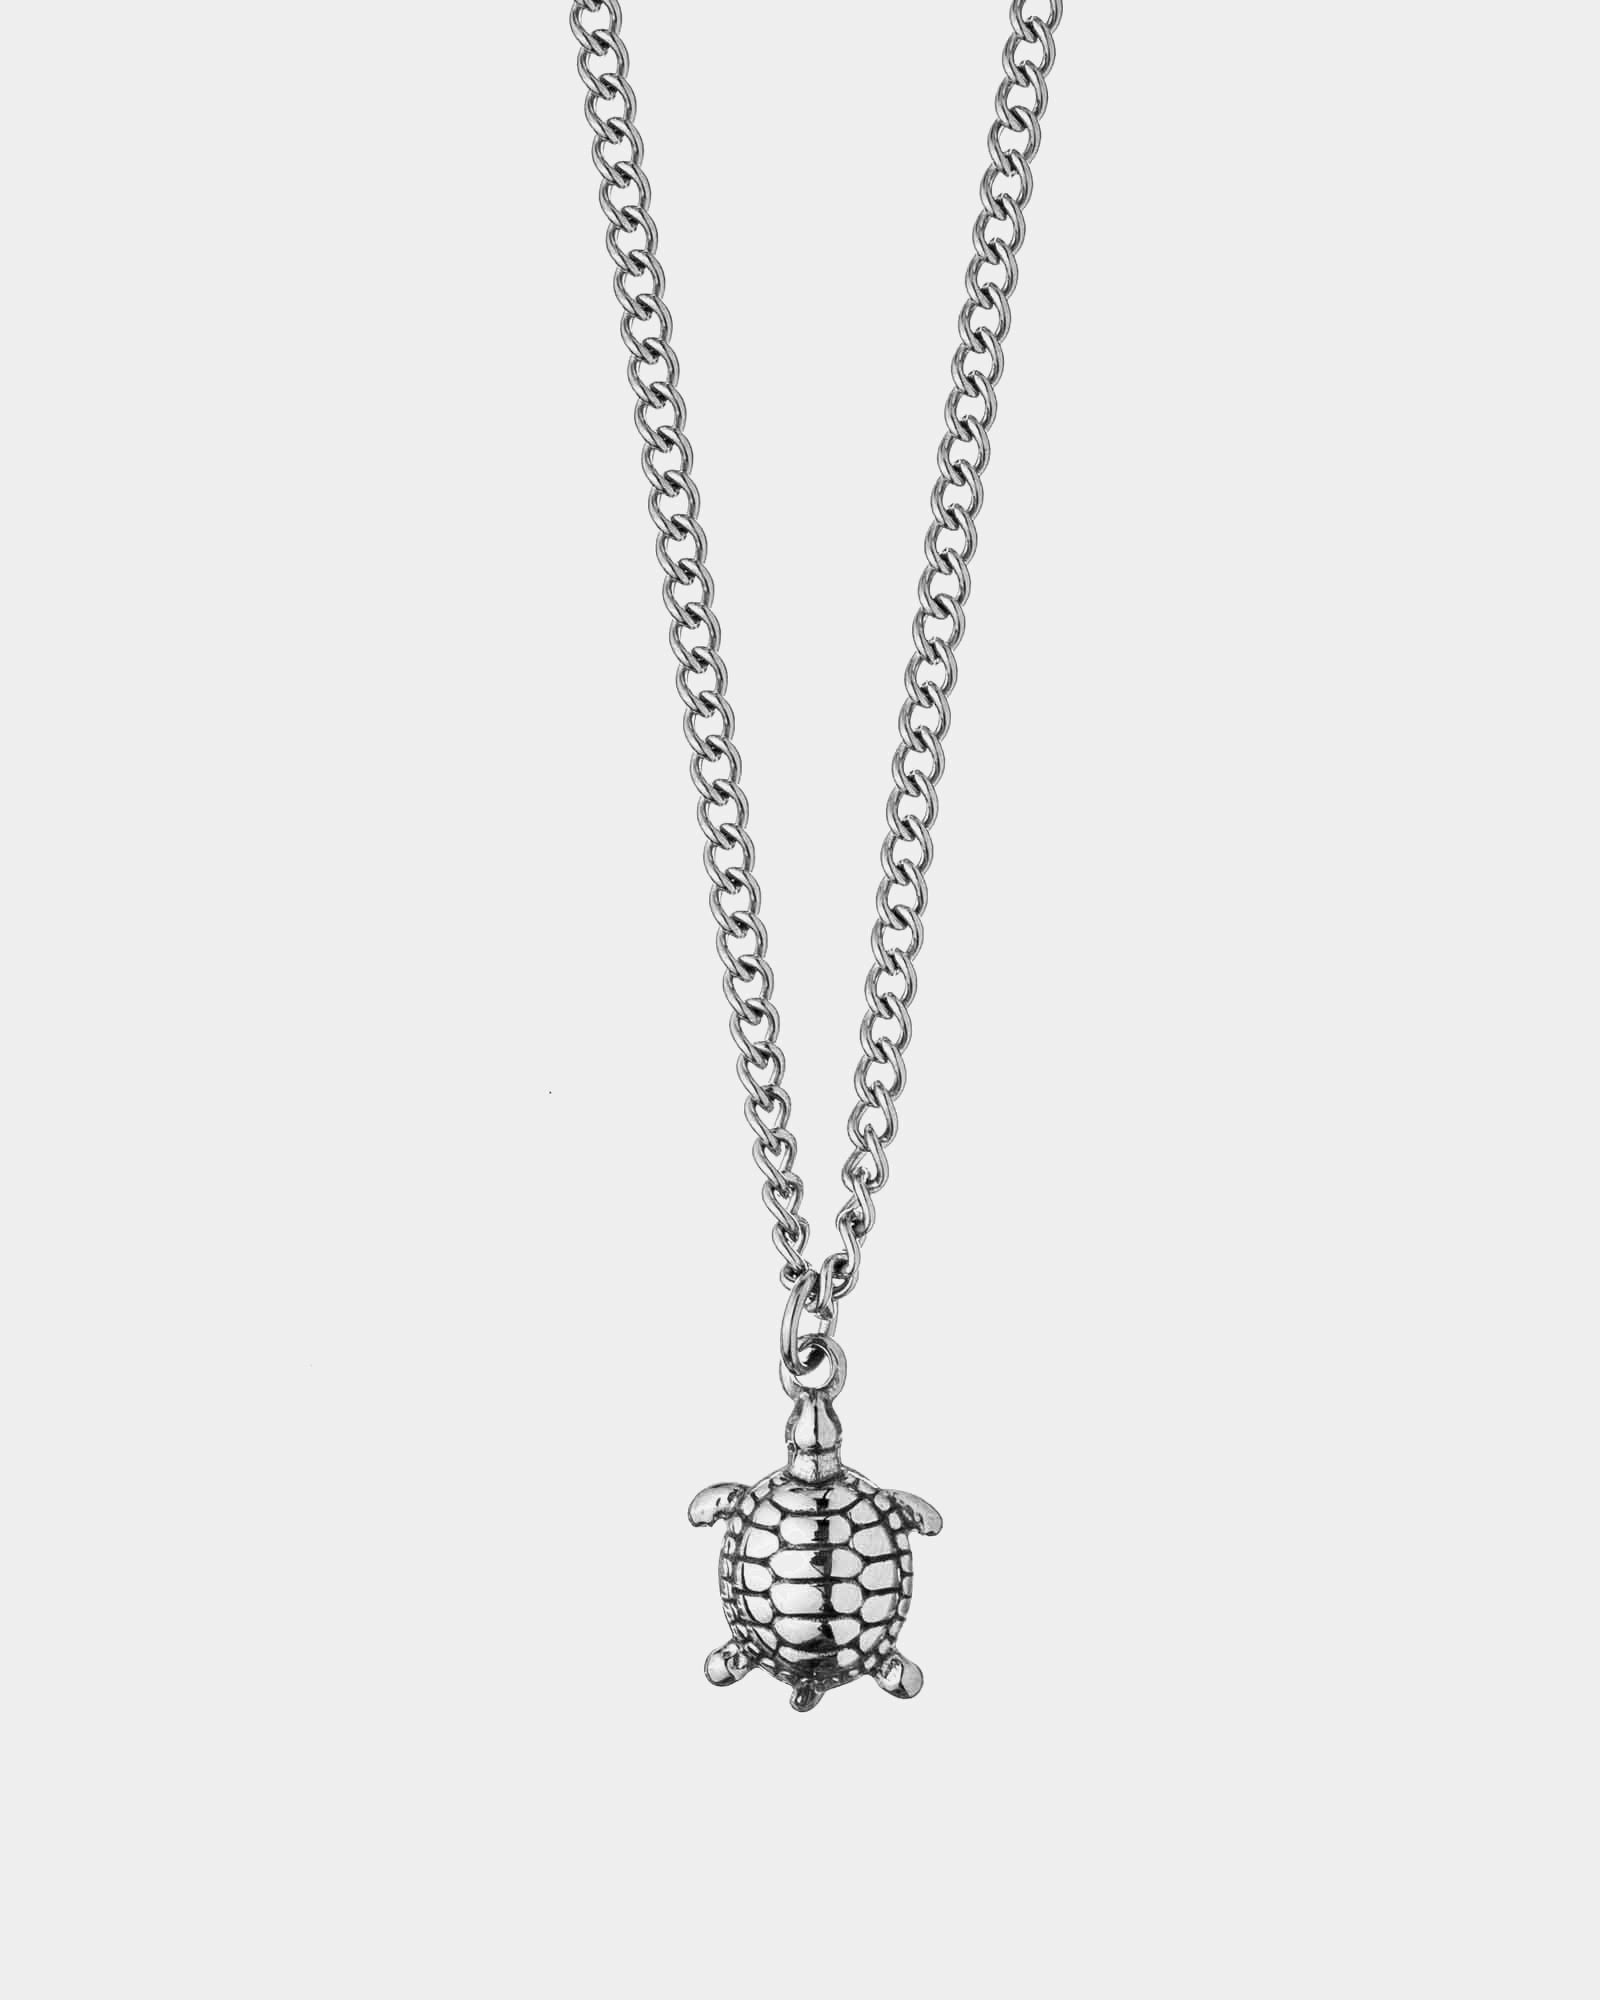 Stainless Steel Necklace The Turtle - Necklace with Pendant - Online Unissex Jewelry - Dicci